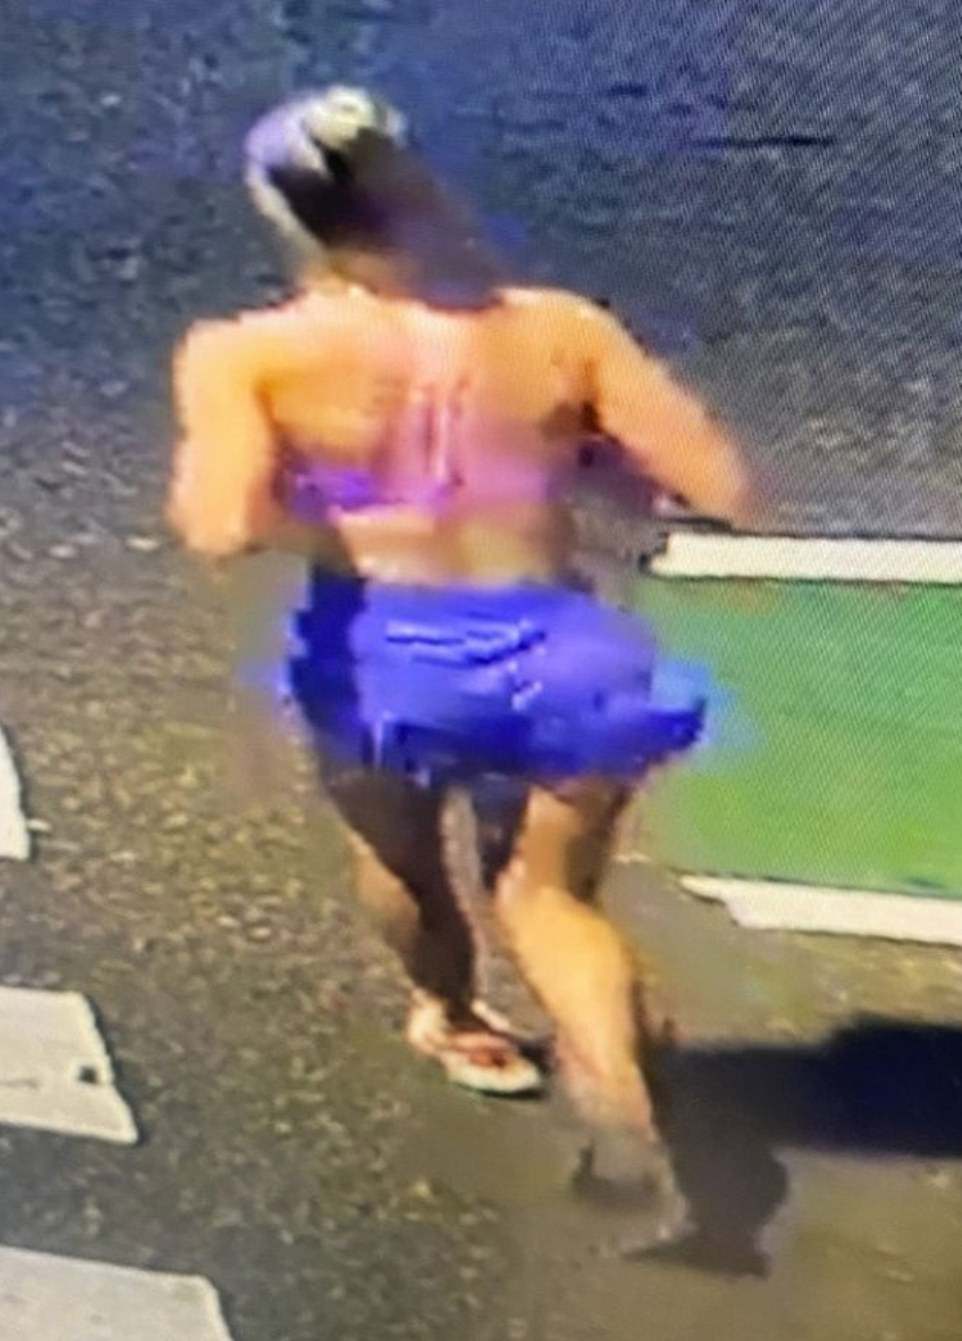 Cops have released an image of Fletcher, a mother of two, in running gear moments before she was snatched